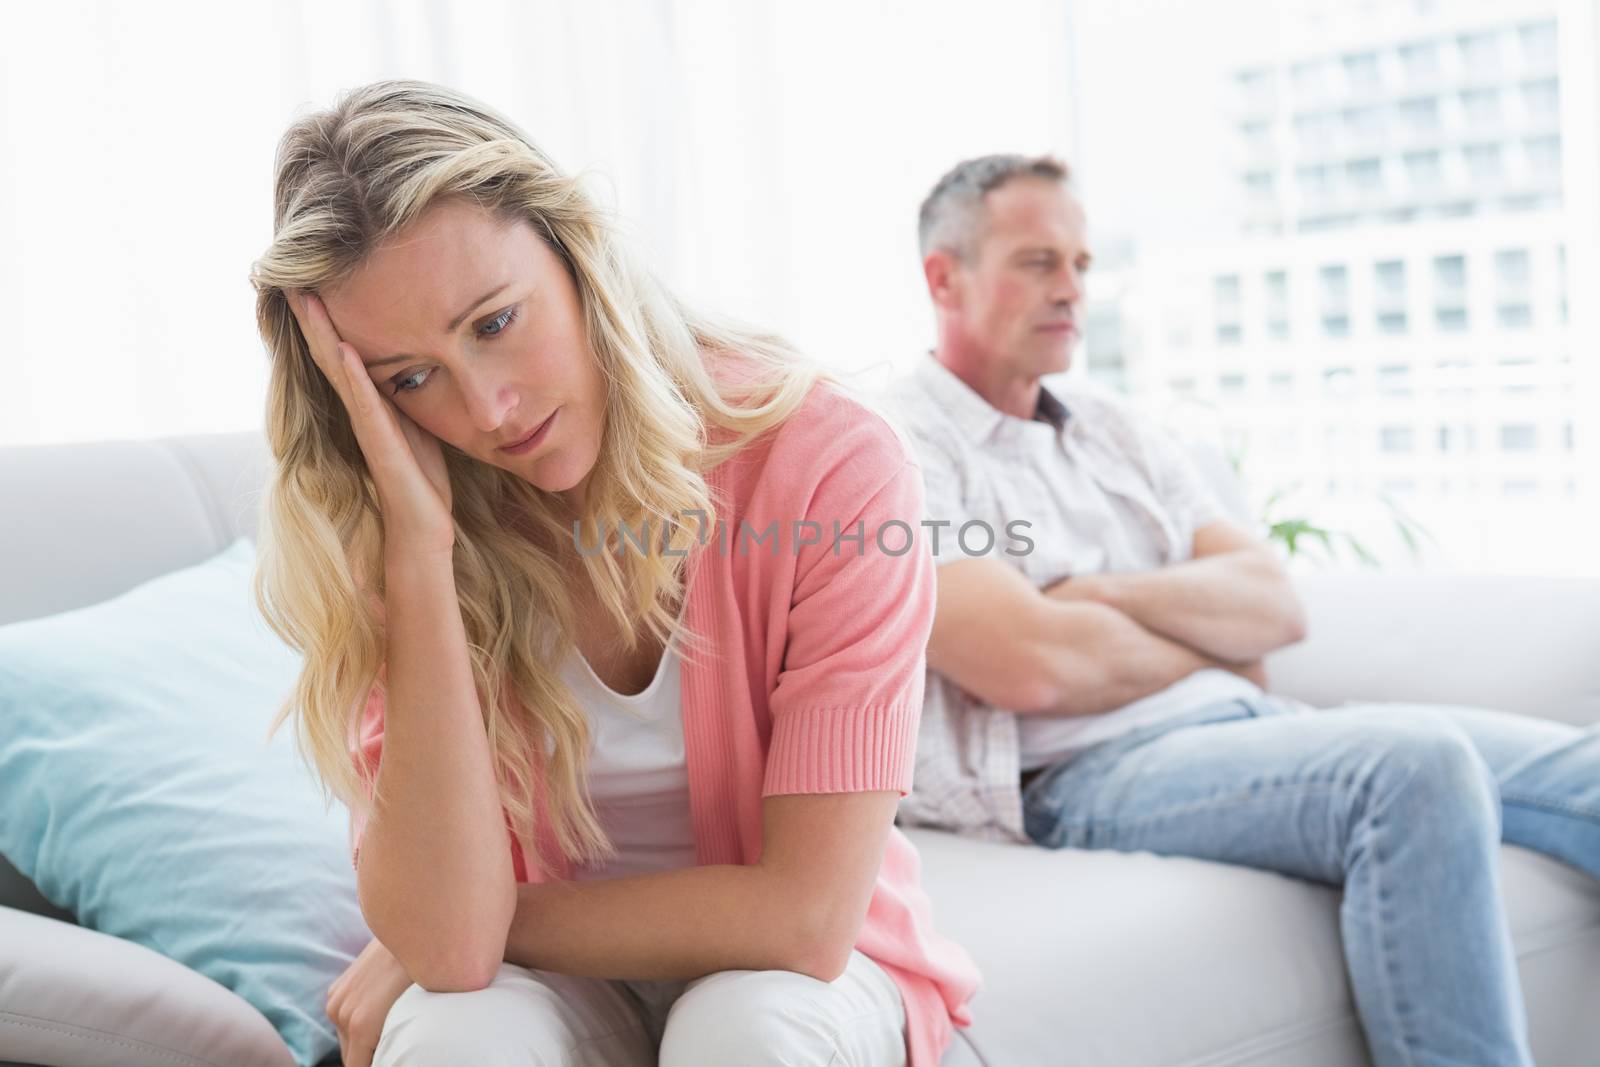 Unhappy couple are stern and having troubles by Wavebreakmedia